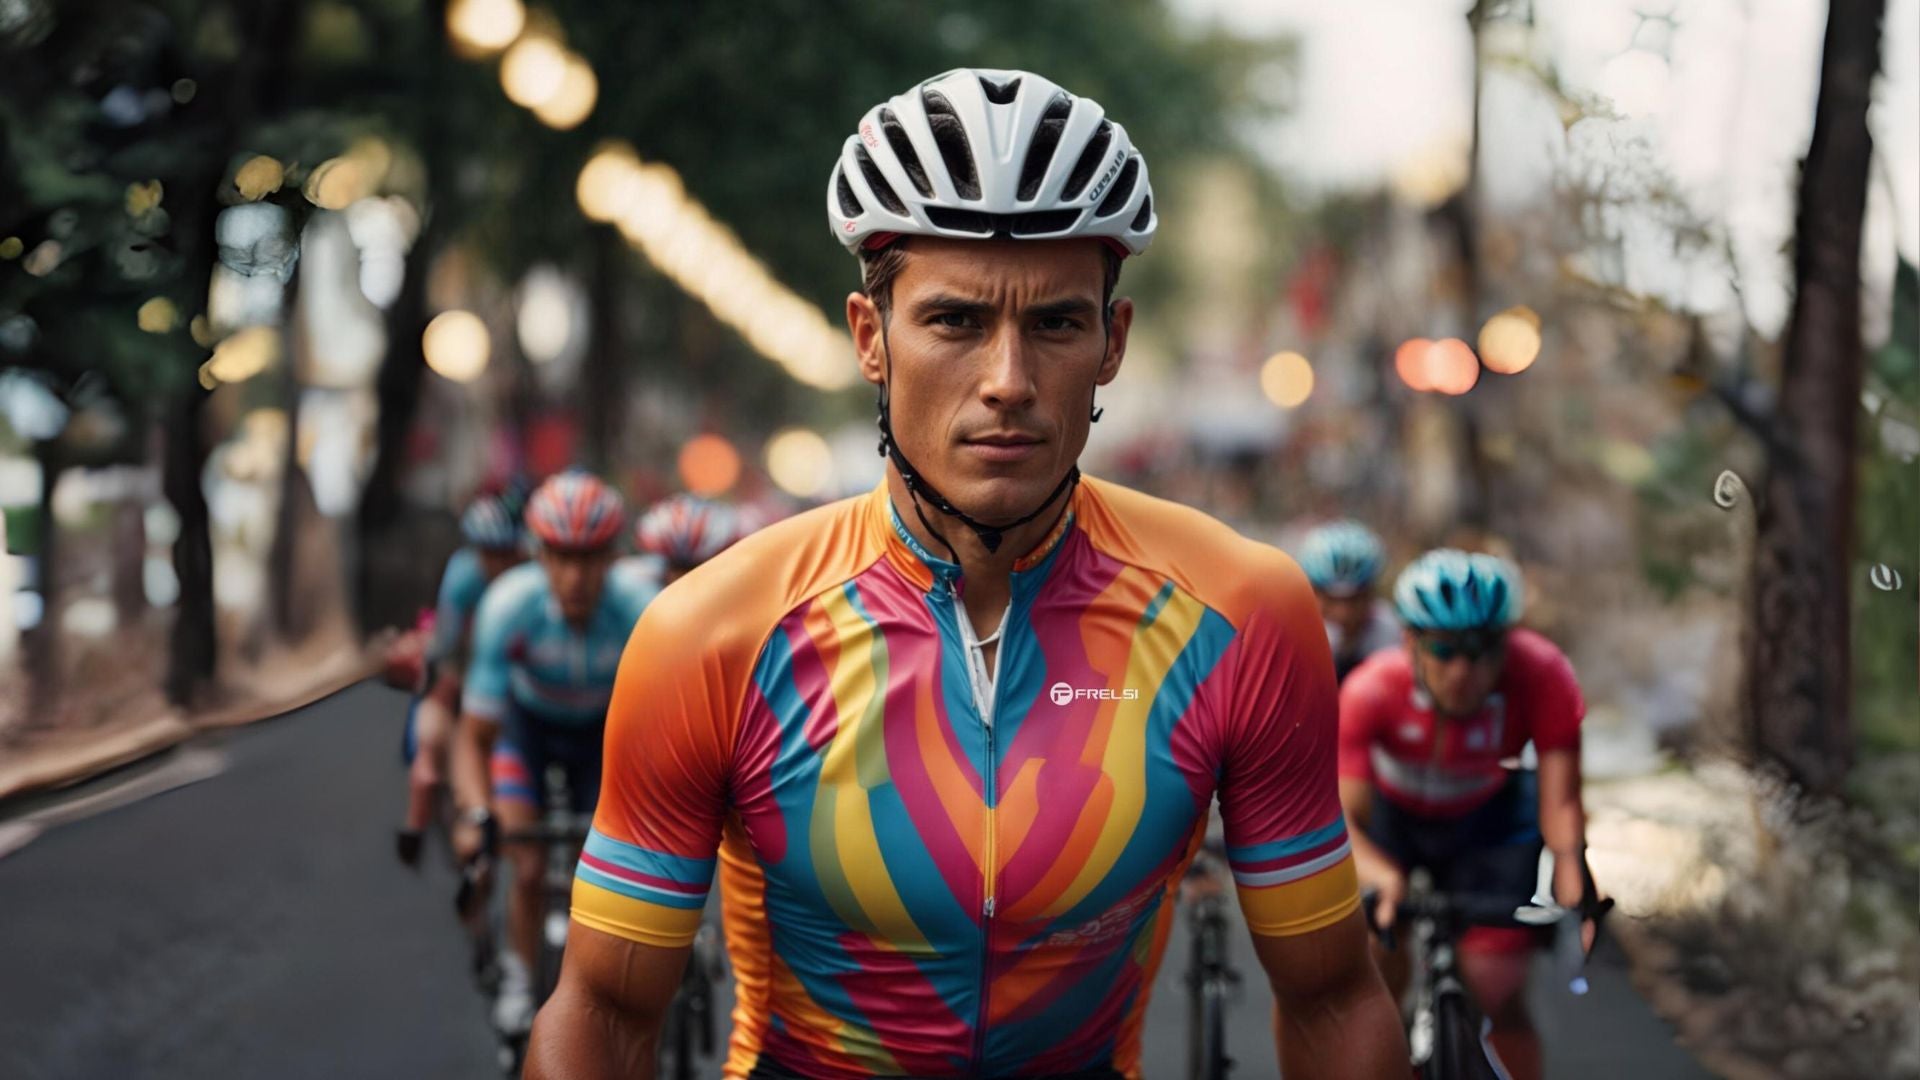 Men's Collection  Unique Cycling Jerseys, Team Kits and Apparel – Cycling  Frelsi